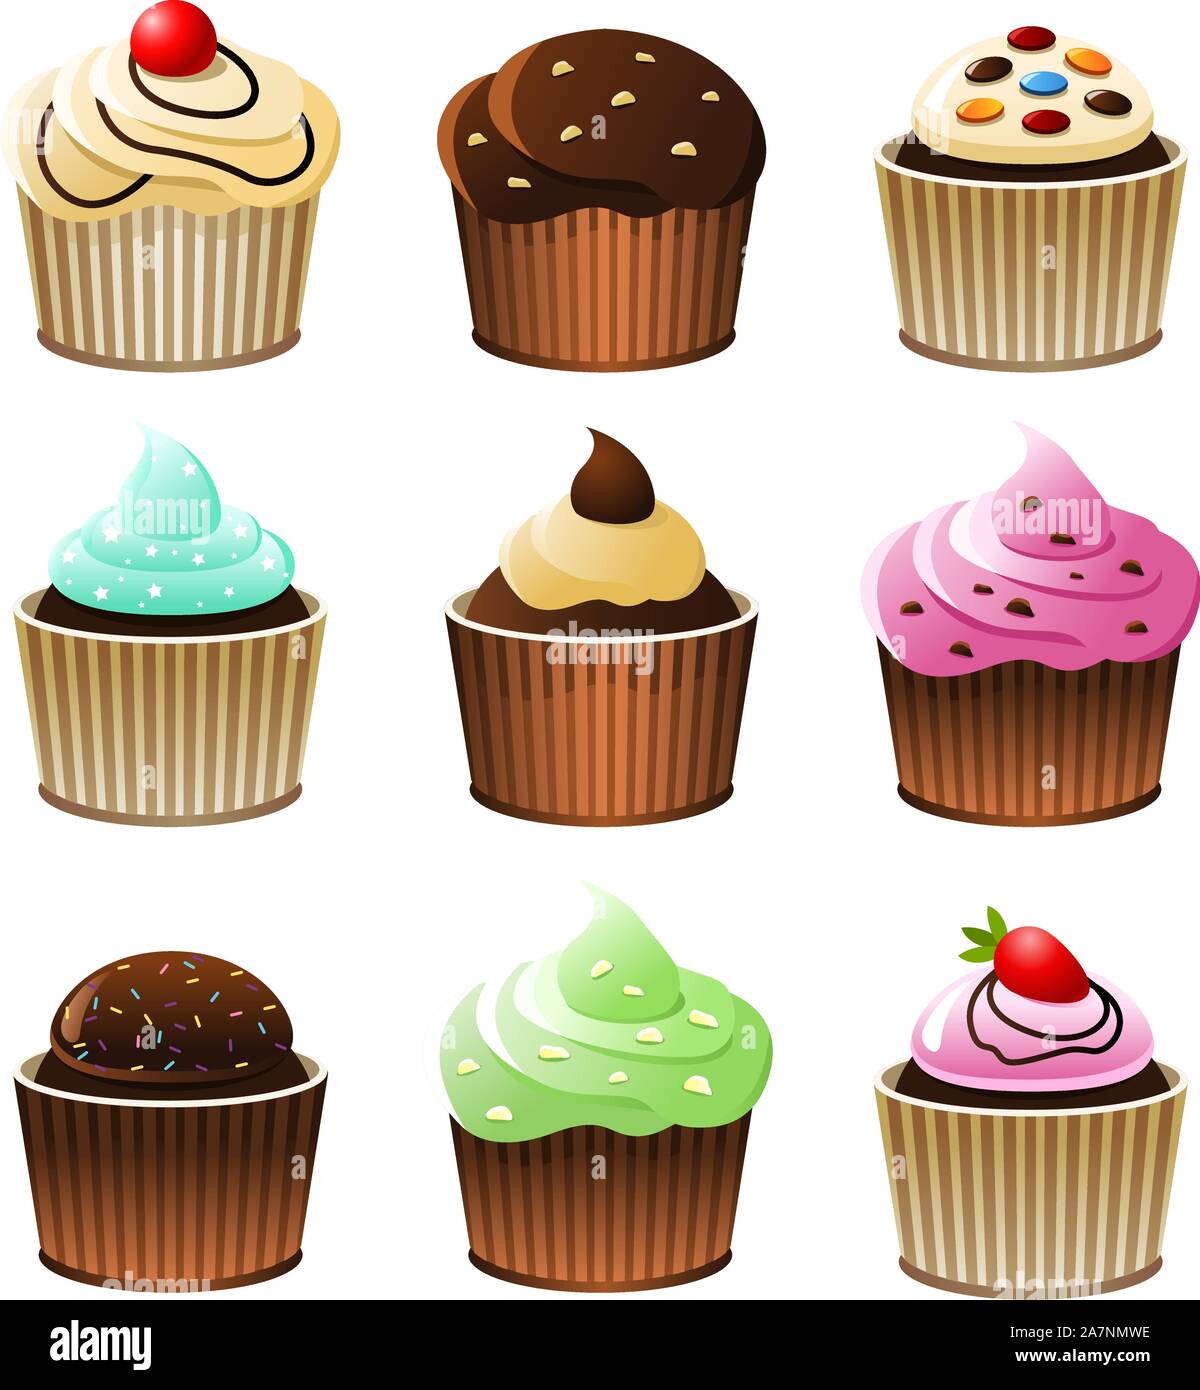 Cupcake cup cake icon set, with nine cupcakes with different topping vector illustration. Stock Vector